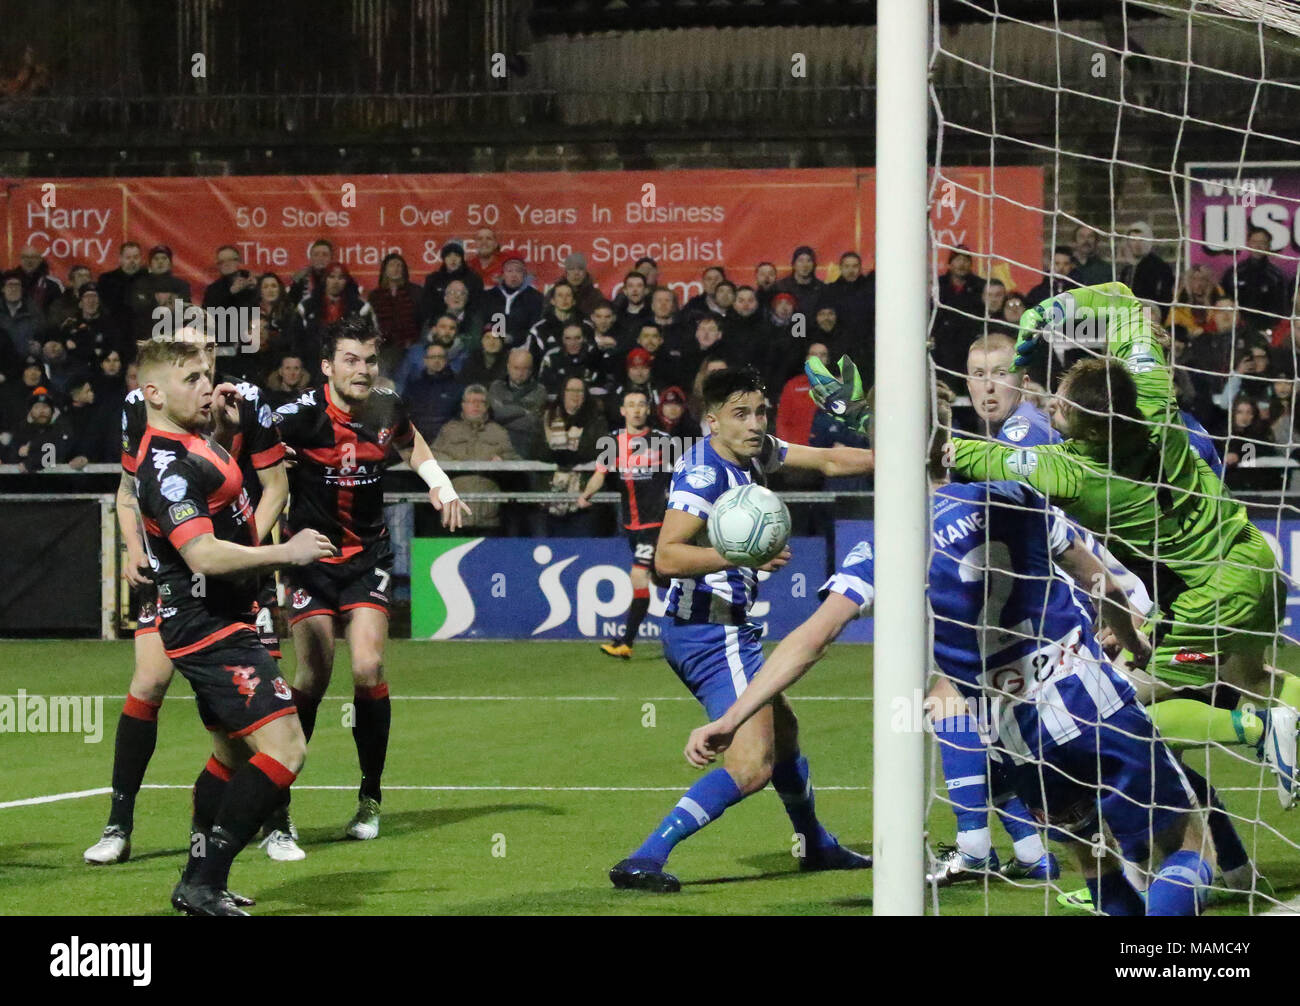 Seaview, Belfast, Northern Ireland, UK. 03 April 2018. Danske Bank Premiership - Crusaders 1 Coleraine 1. In tonight's top of the table clash at a packed Seaview, Crusaders drew 1-1 with Coleraine. The draw keeps Crusaders top of the league, two points ahead of Coleraine with four games to play. Coleraine goalkeeper Kris Johns kept out this effort from Philip Lowry but David Cushley (left - red/black) followed up to net the equaliser. Credit: David Hunter/Alamy Live News. Stock Photo